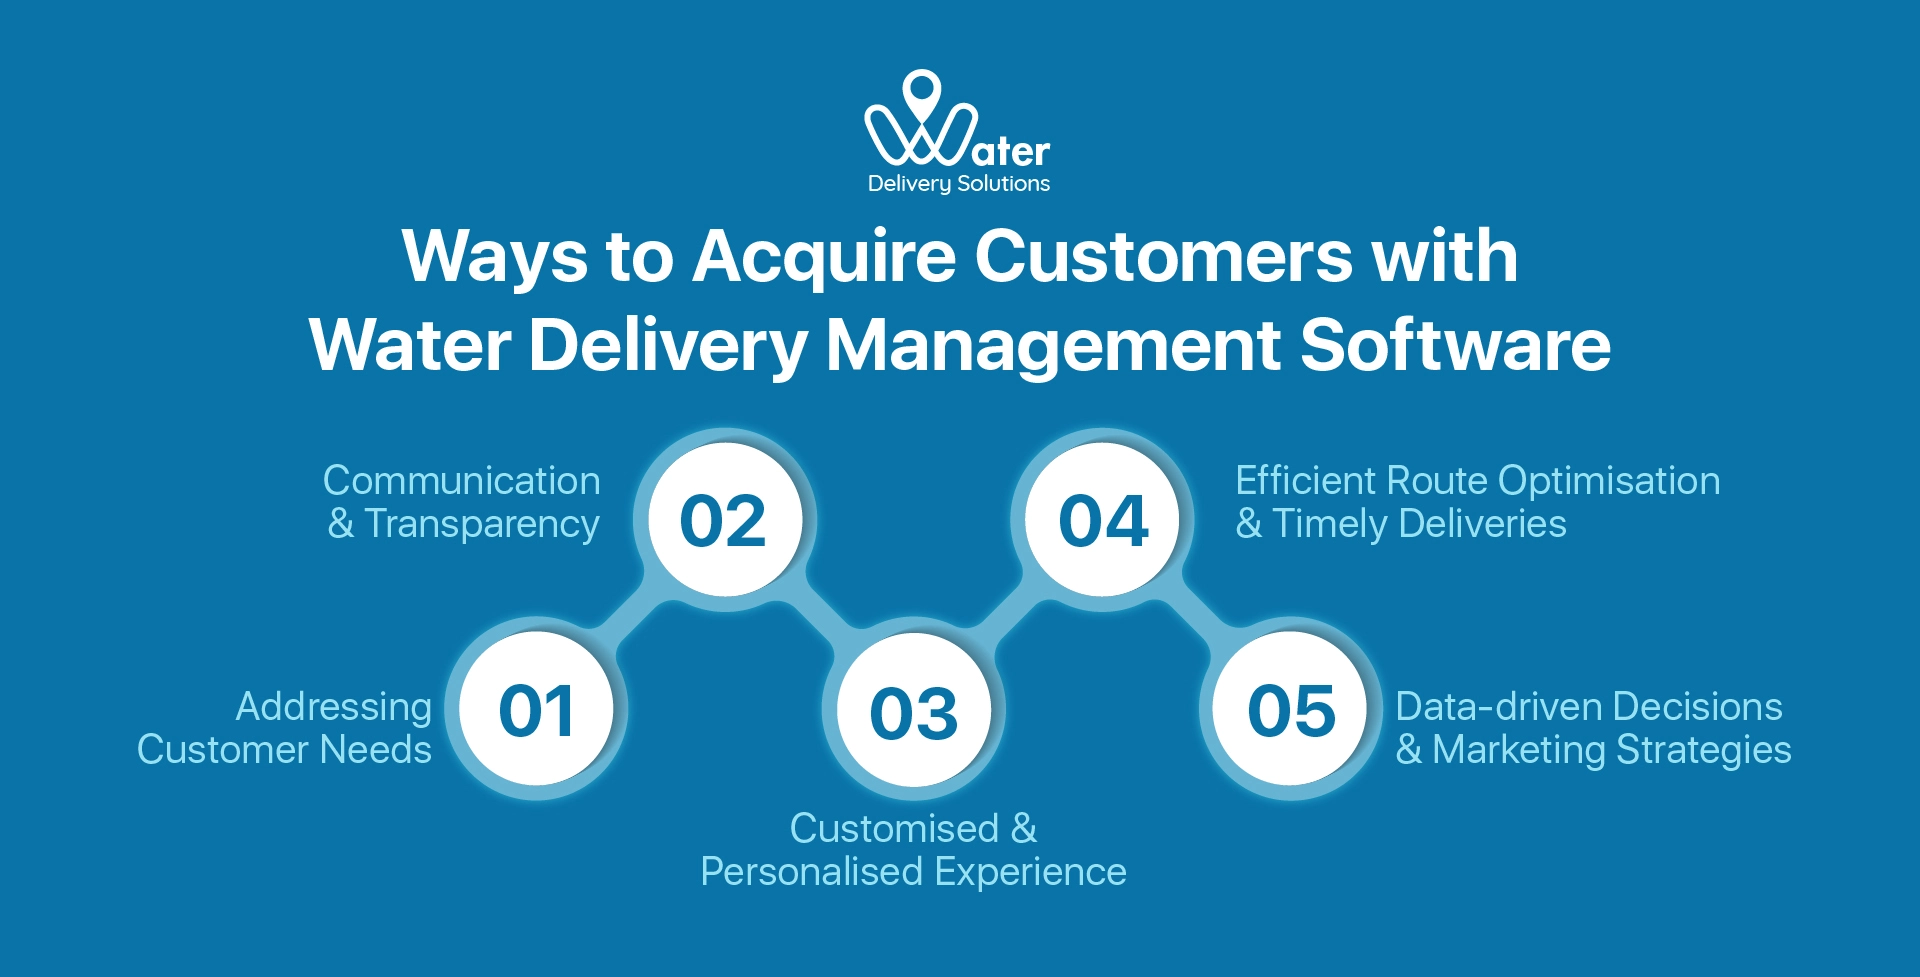 ravi garg, wds, ways, acquire customers, water delivery management software, customer needs, coomunication and transparency, cutsomised and personalised experience, route optimisation, timely delivery, data-driven decisions, marketing strategies